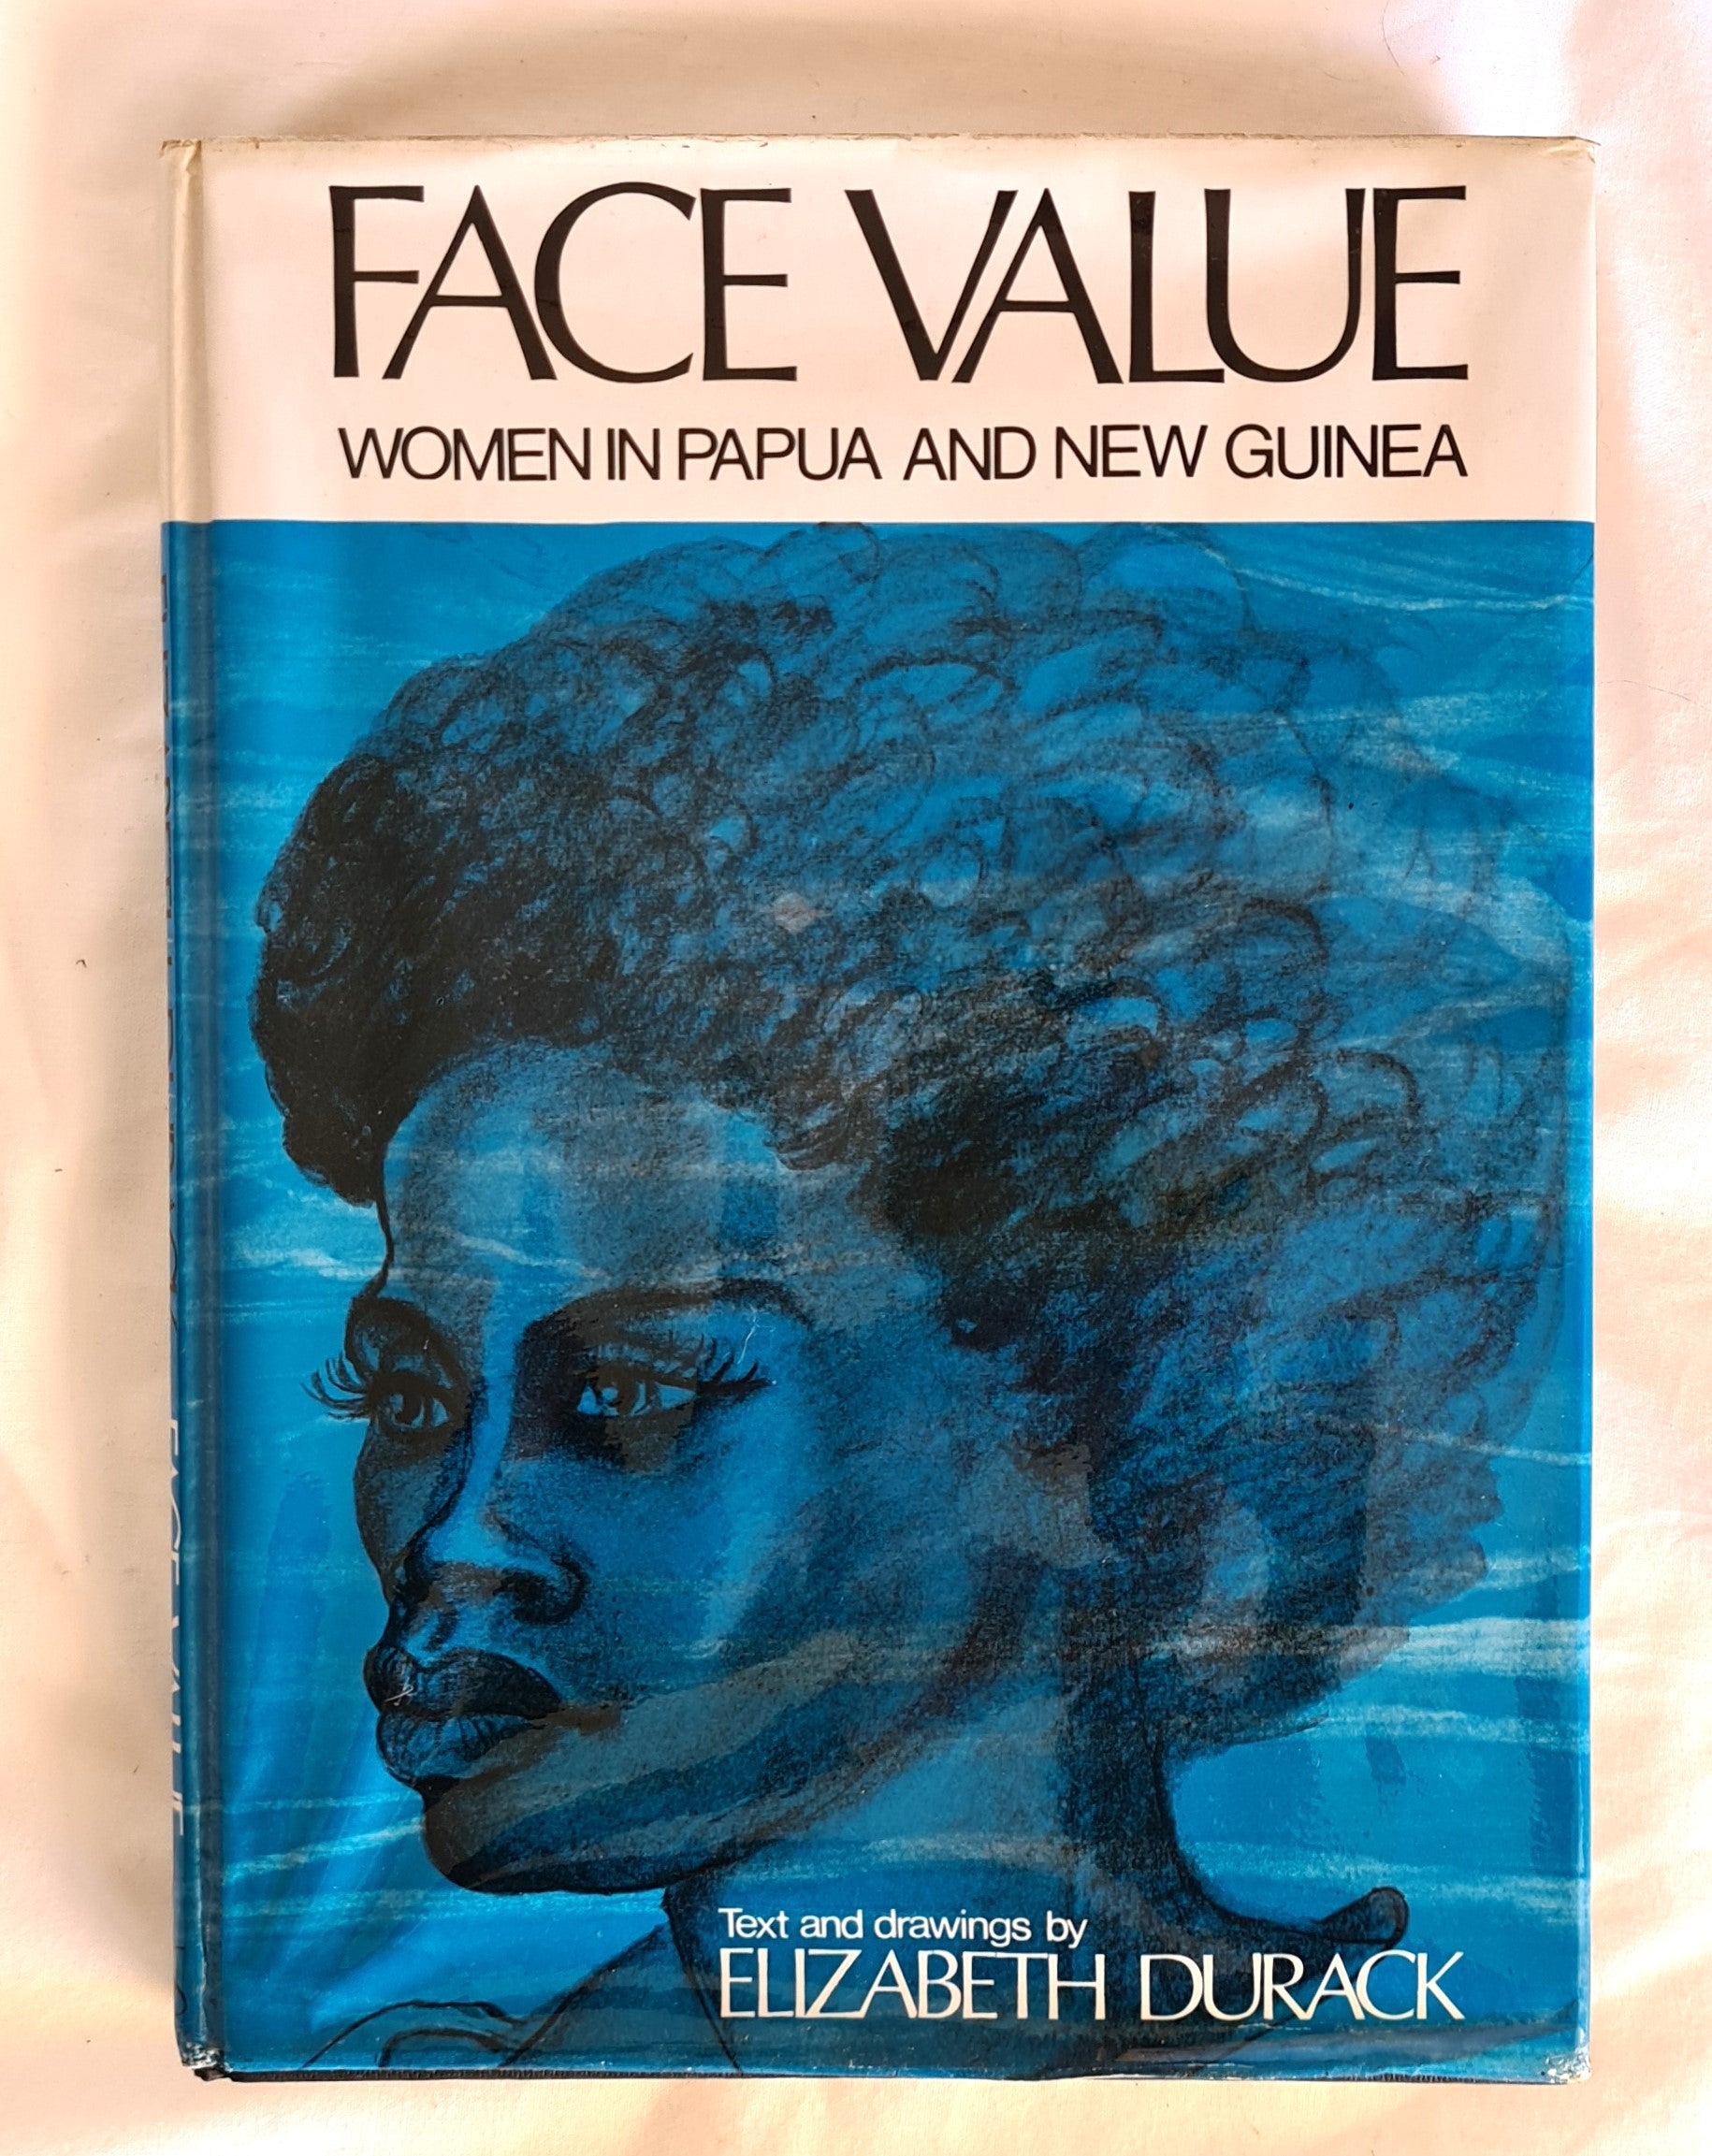 Face Value  Women in Papua and New Guinea  Illustrated by author  by Elizabeth Durack